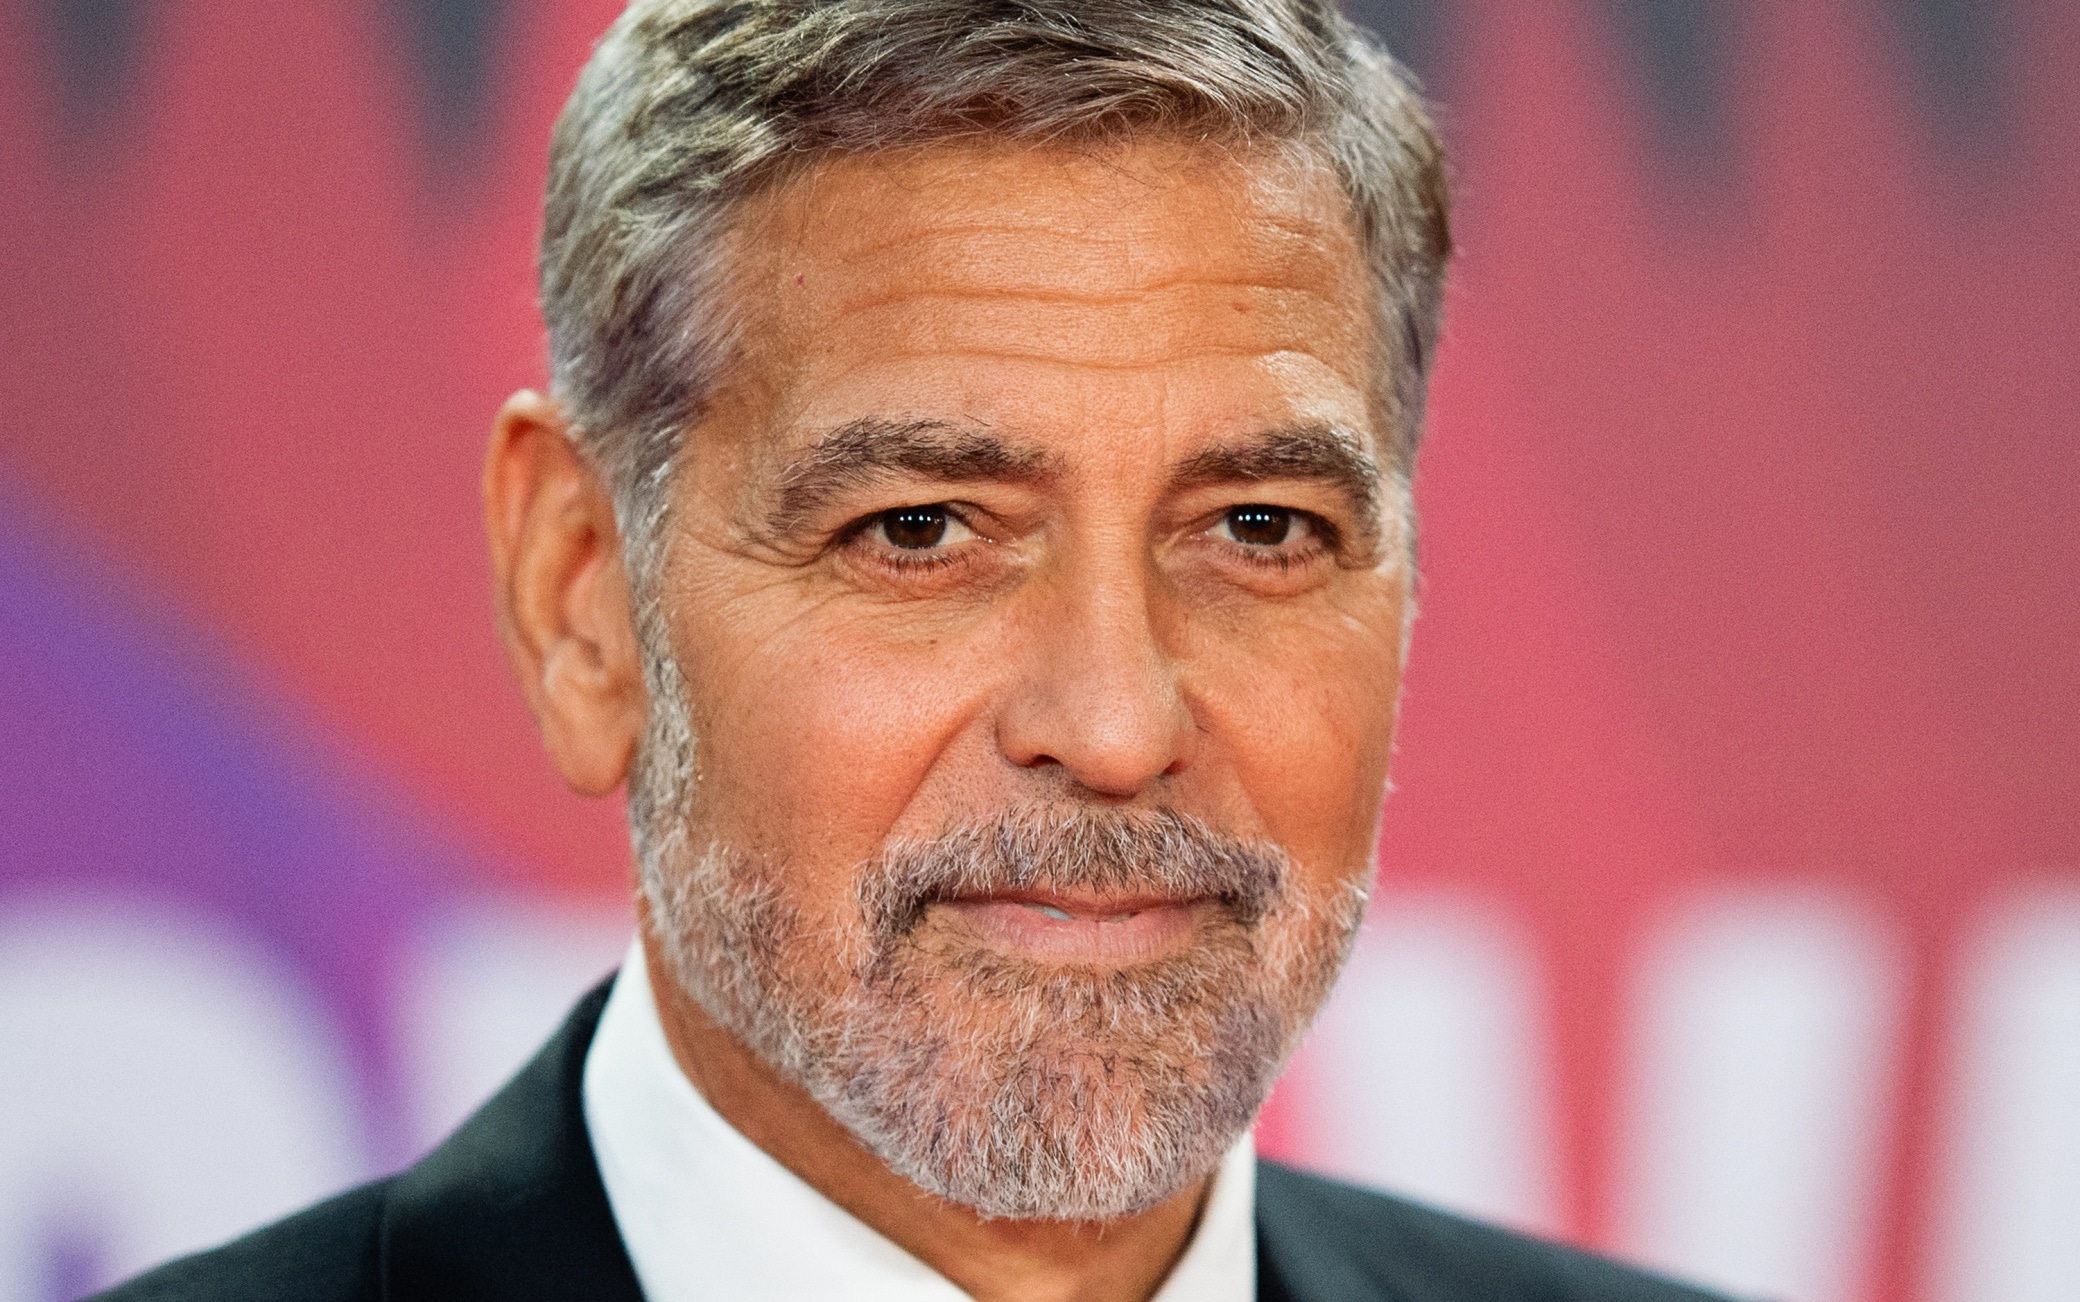 George Clooney: “The motorcycle accident in Sardinia?  There were those who thought about social video “